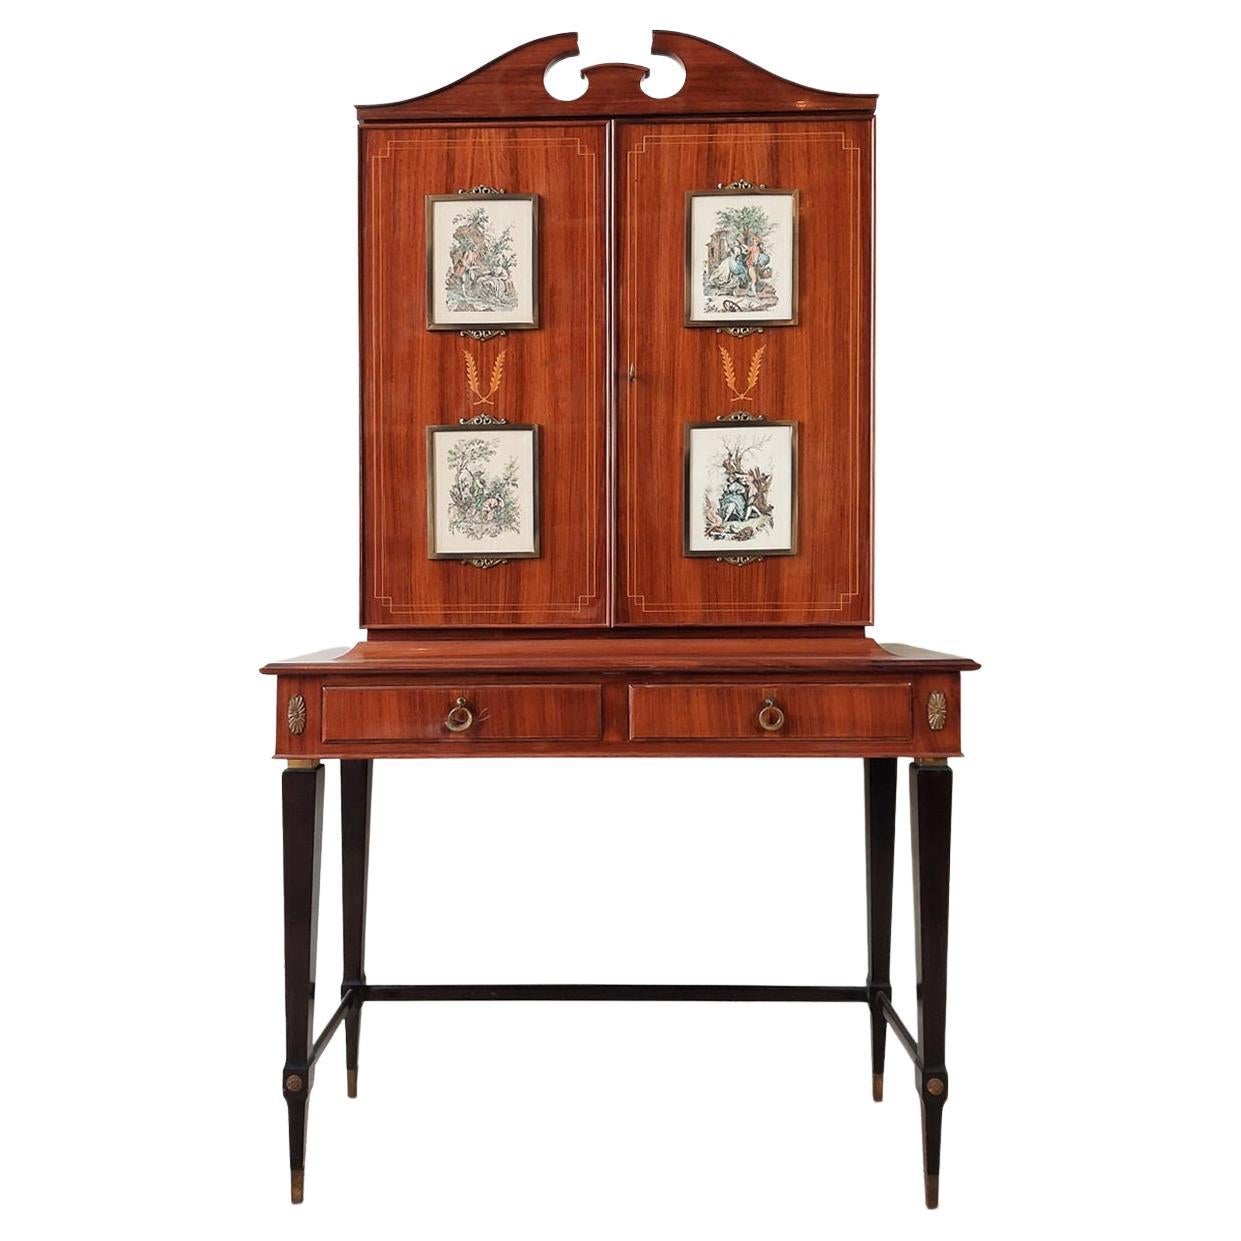 1960s Italian Designer Drinks Cabinet, Inlaid and Decorated with Etchings